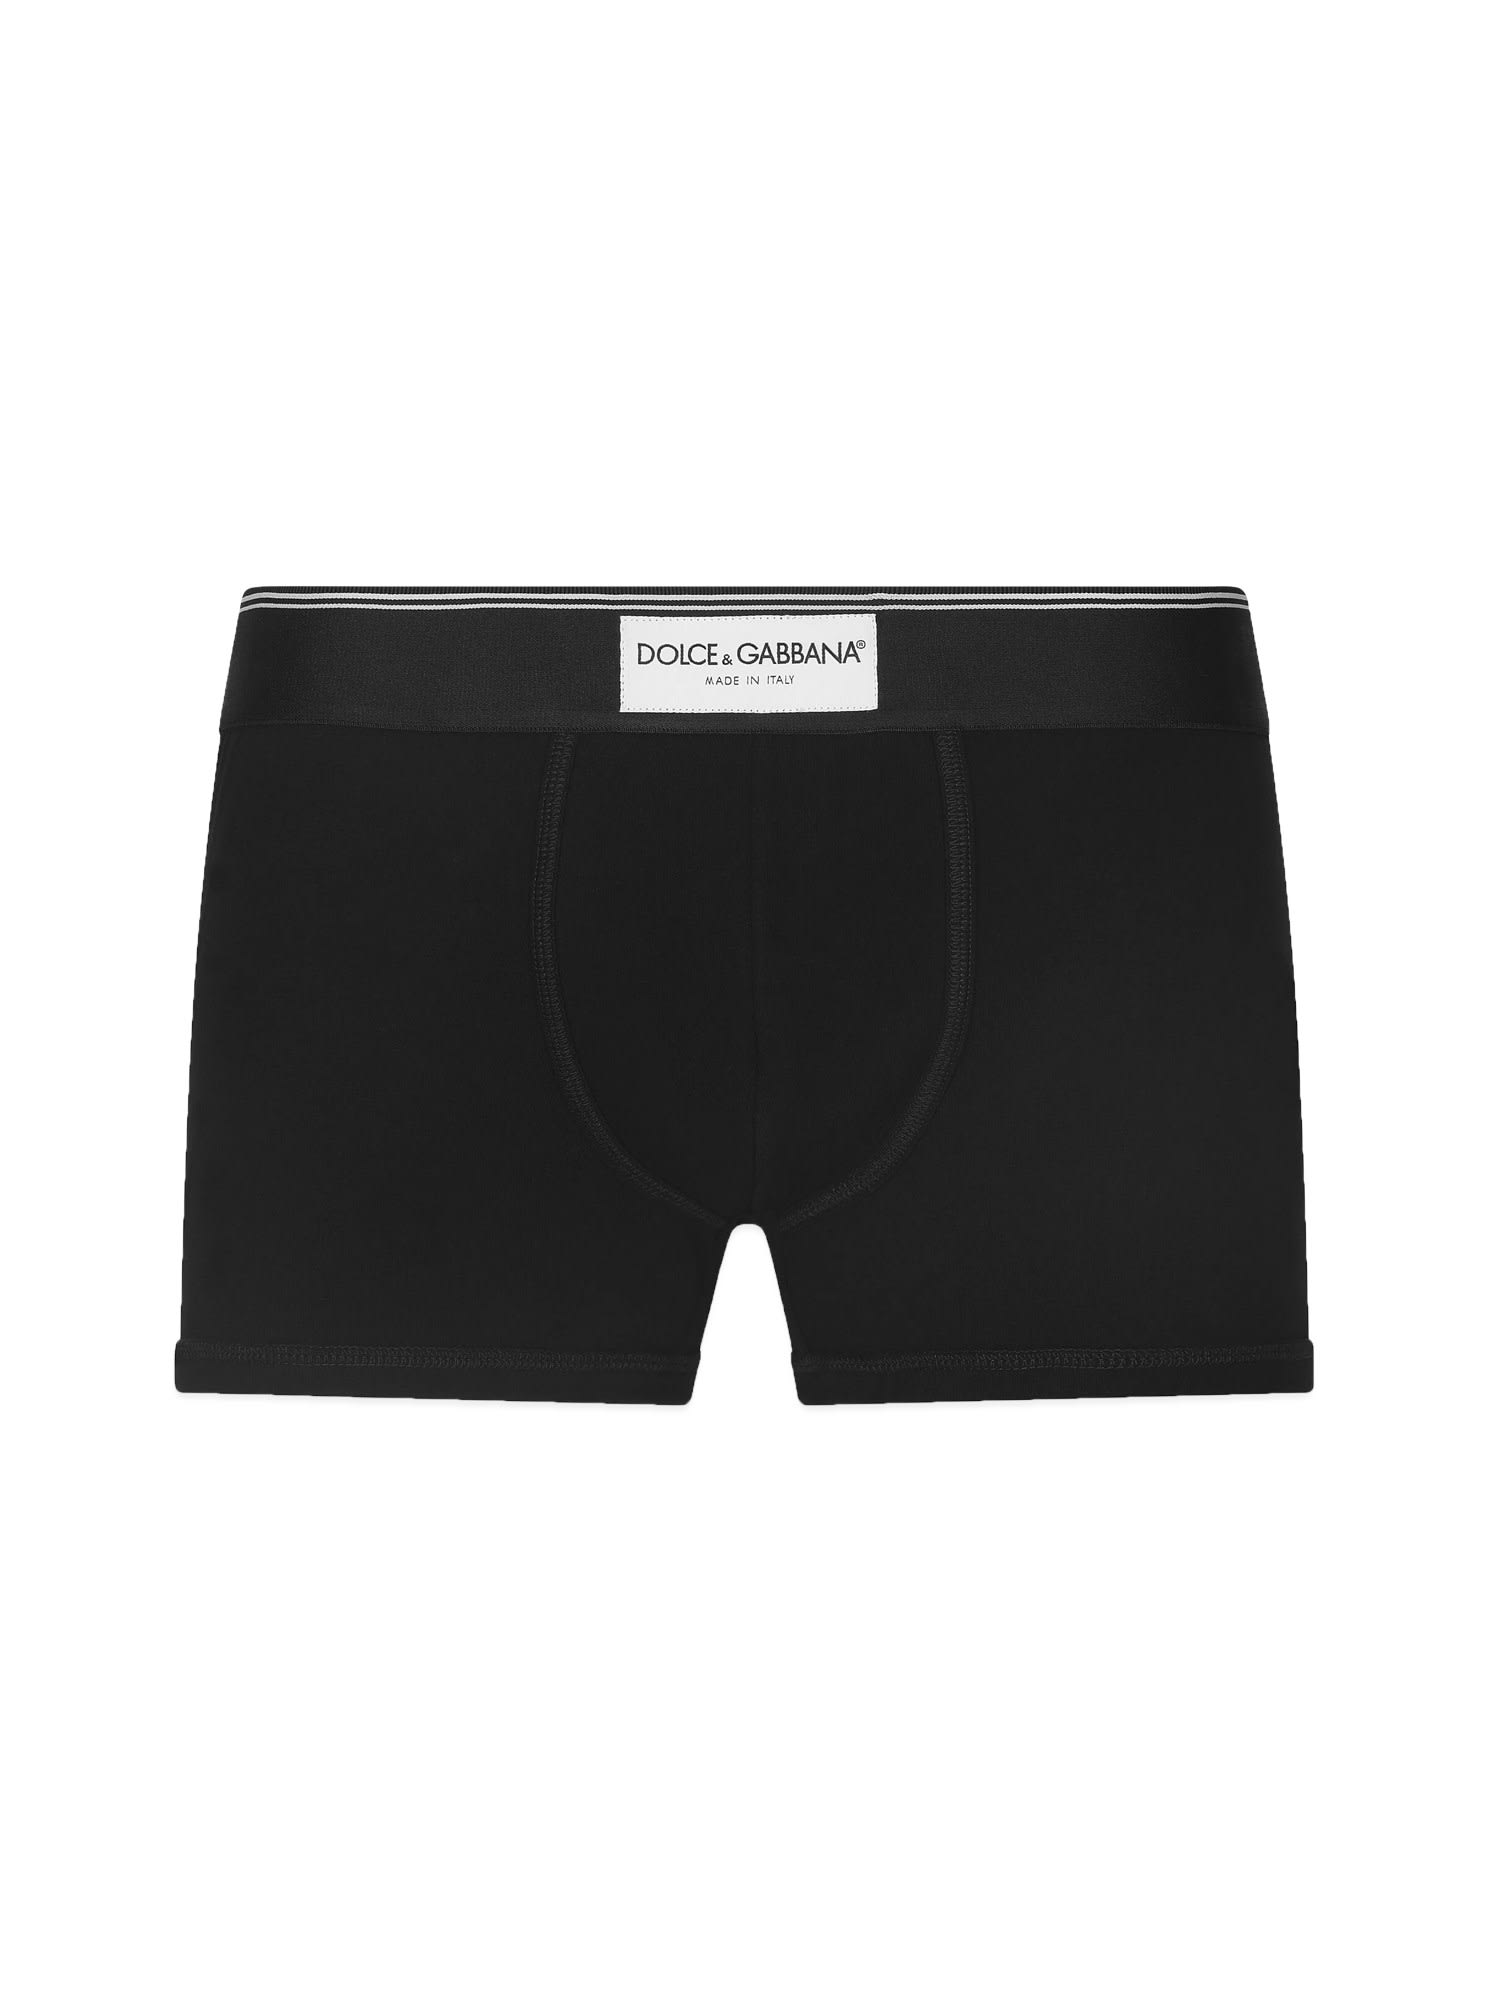 DOLCE & GABBANA BOXERS WITH LOGO